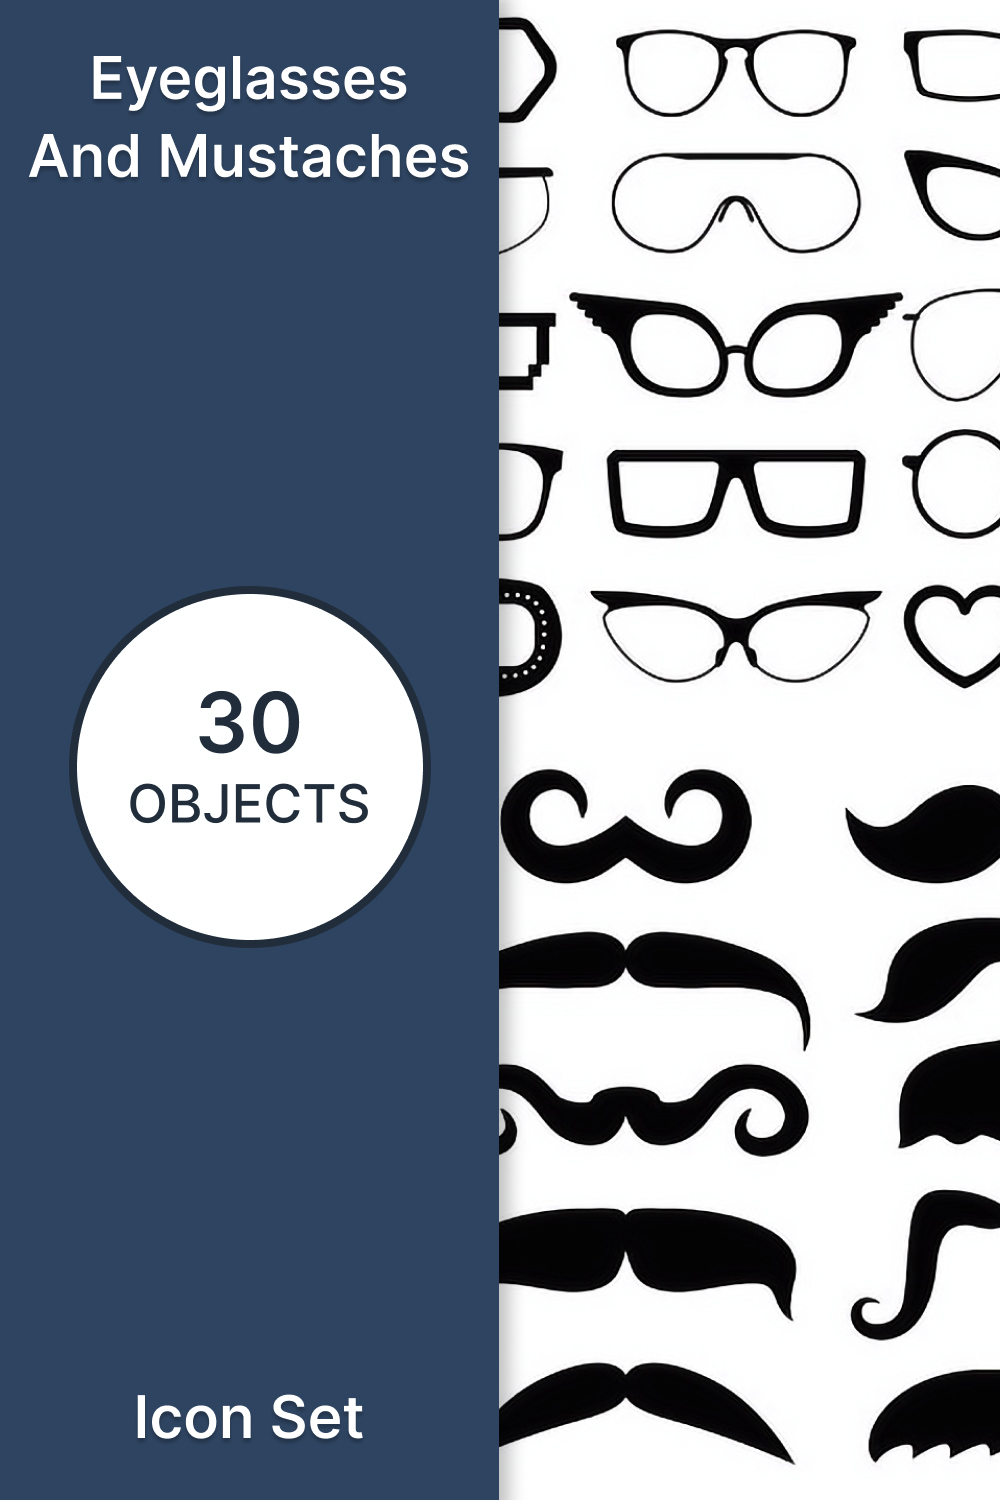 Eyeglasses And Mustaches Icon Set Pinterest Cover.